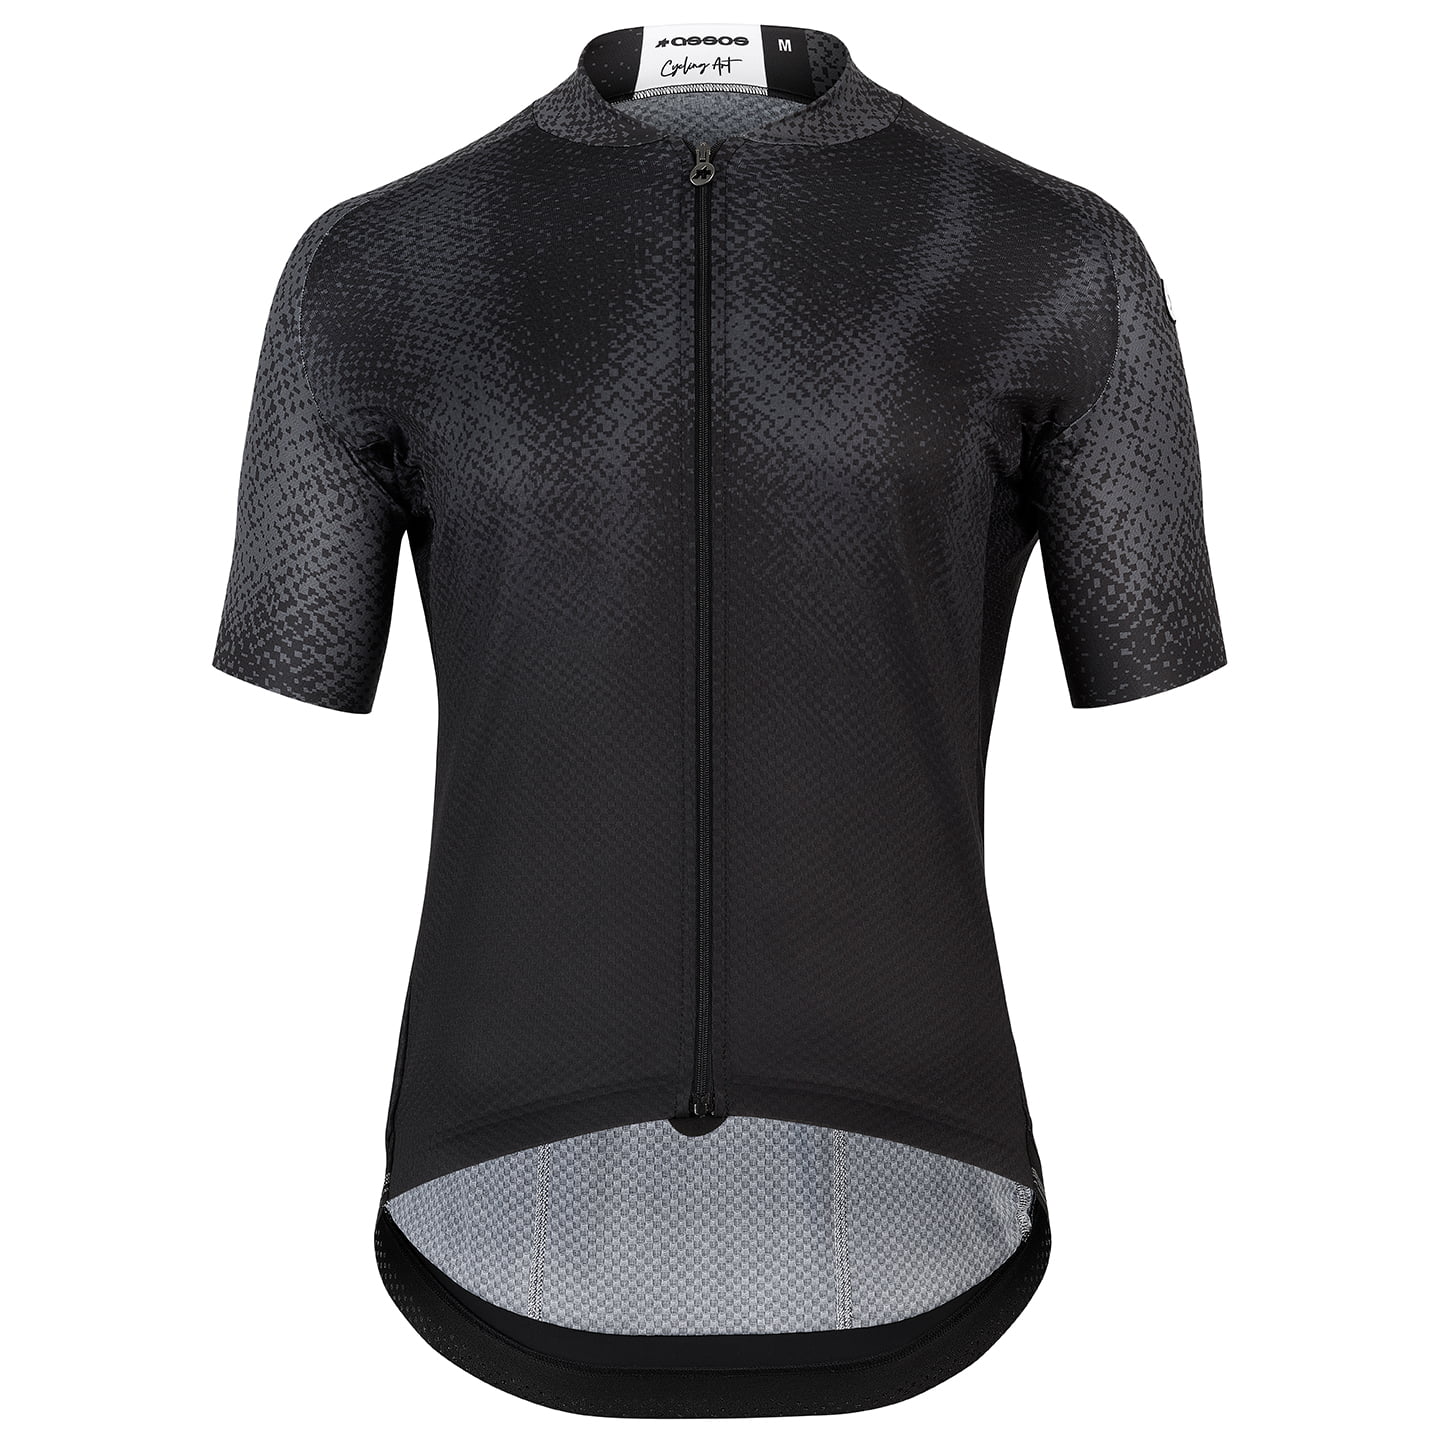 ASSOS Mille GT C2 EVO Heat Map Short Sleeve Jersey Short Sleeve Jersey, for men, size XL, Cycling jersey, Cycle clothing